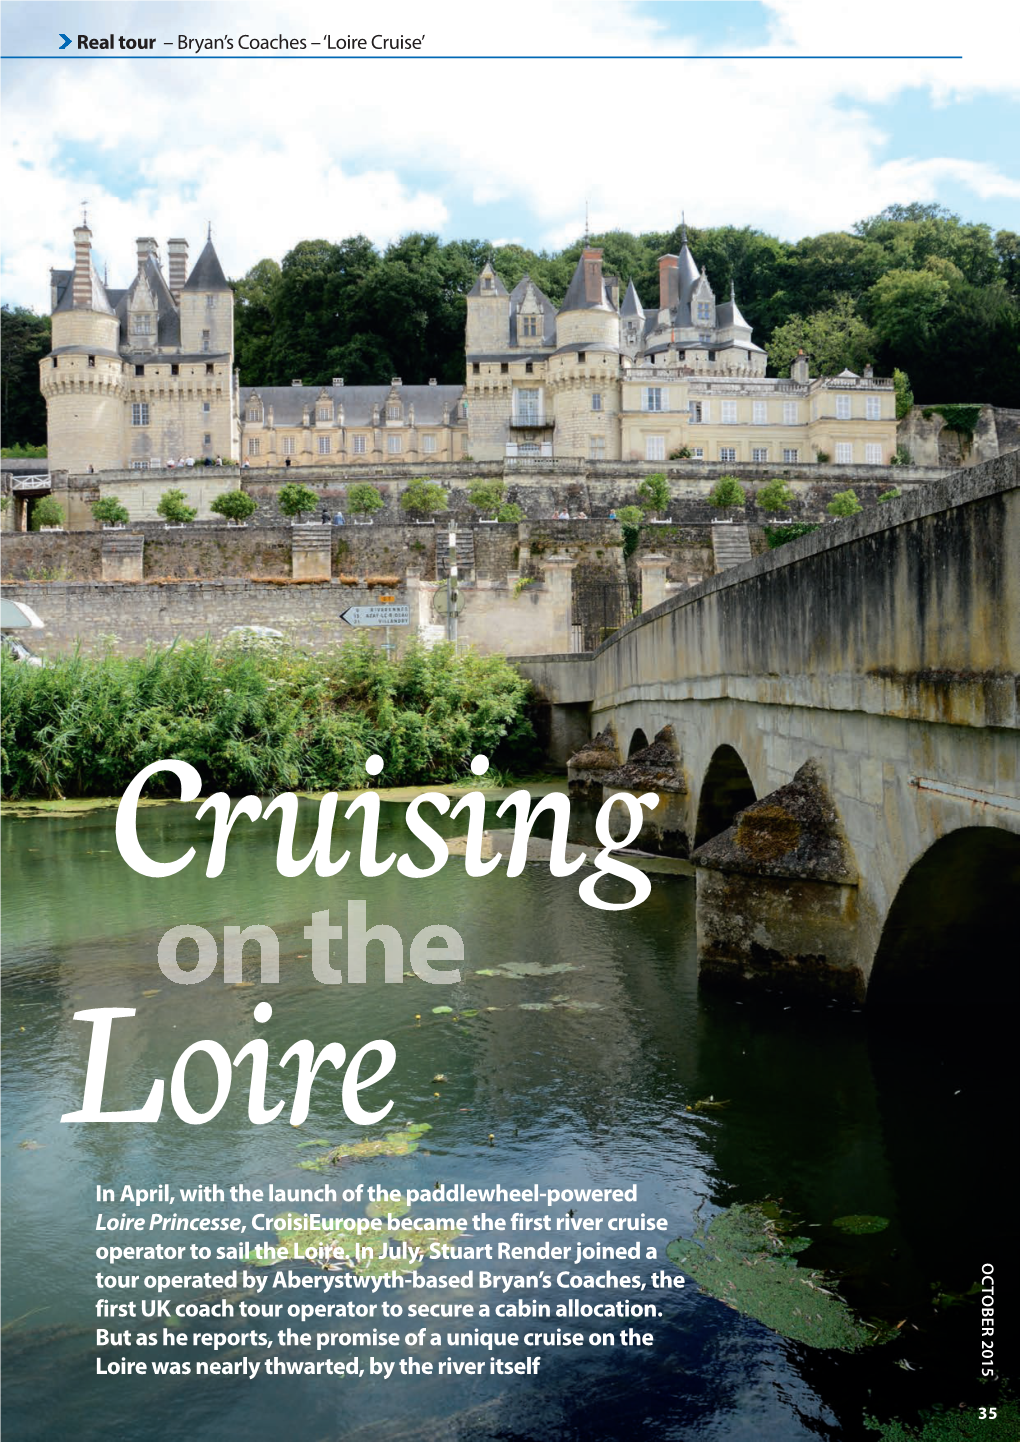 In April, with the Launch of the Paddlewheel-Powered Loire Princesse, Croisieurope Became the First River Cruise